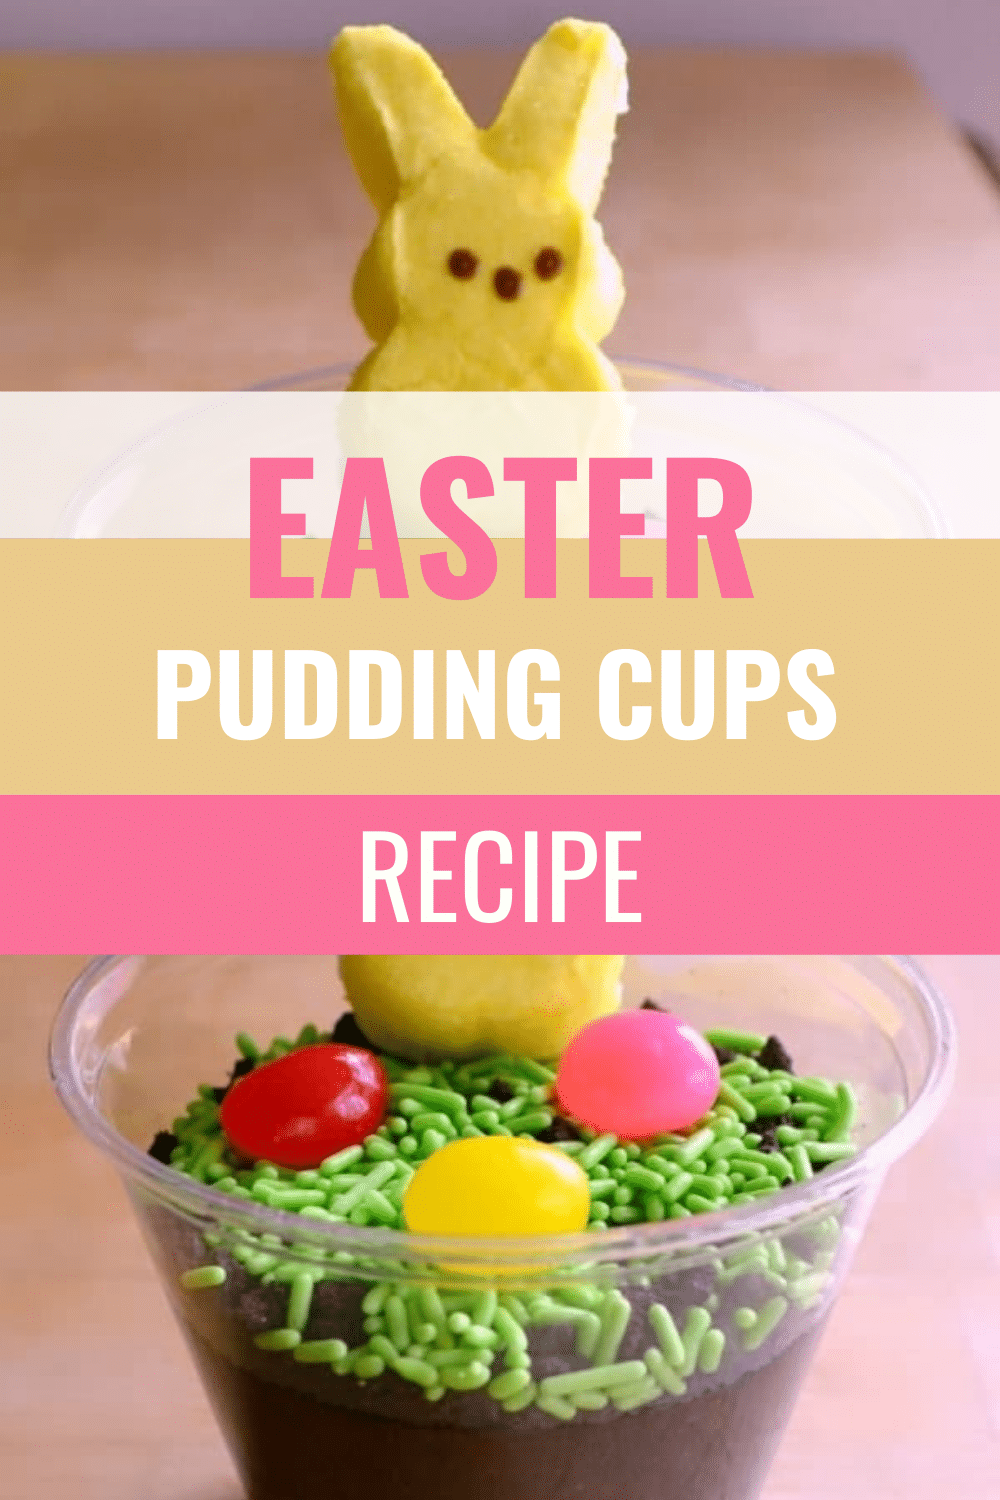 These Easter pudding cups are eye-catching treats that are actually easy to put together in just a few minutes, and kids love them. #easter #puddingcups #forkids #dirtpudding via @wondermomwannab